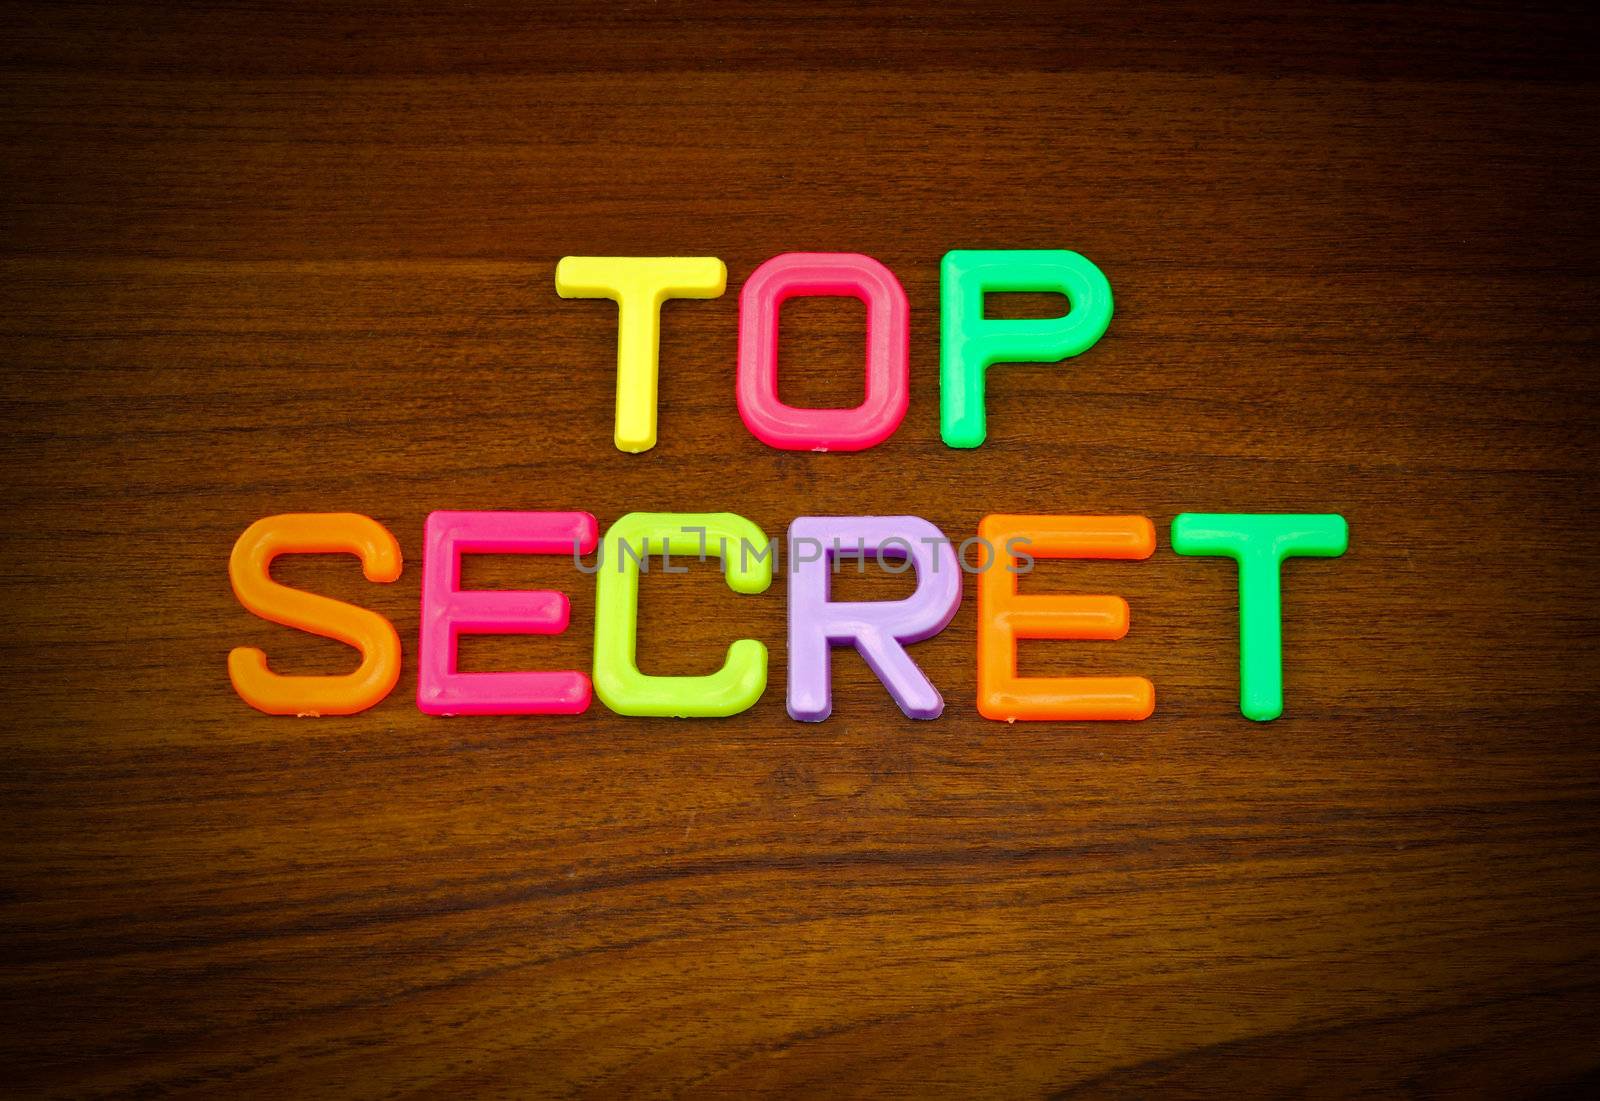 Top secret in colorful toy letters on wood background  by nuchylee